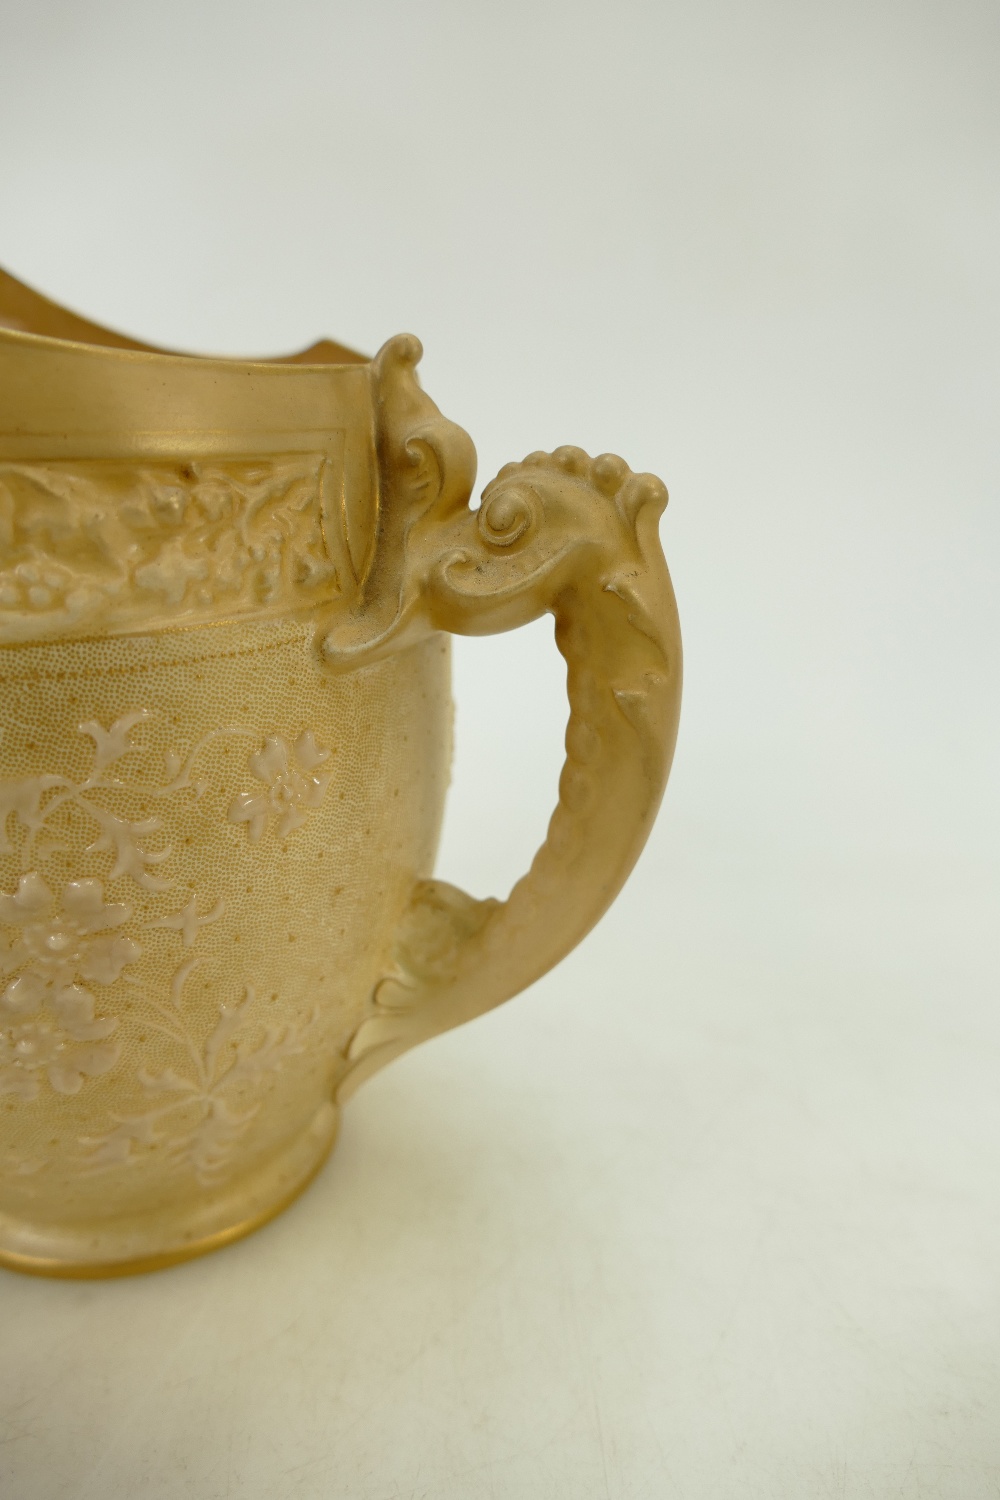 Doulton Burslem Jug: Doulton Burslem ewer decorated all around with flowers and mask head to spout, - Image 4 of 6